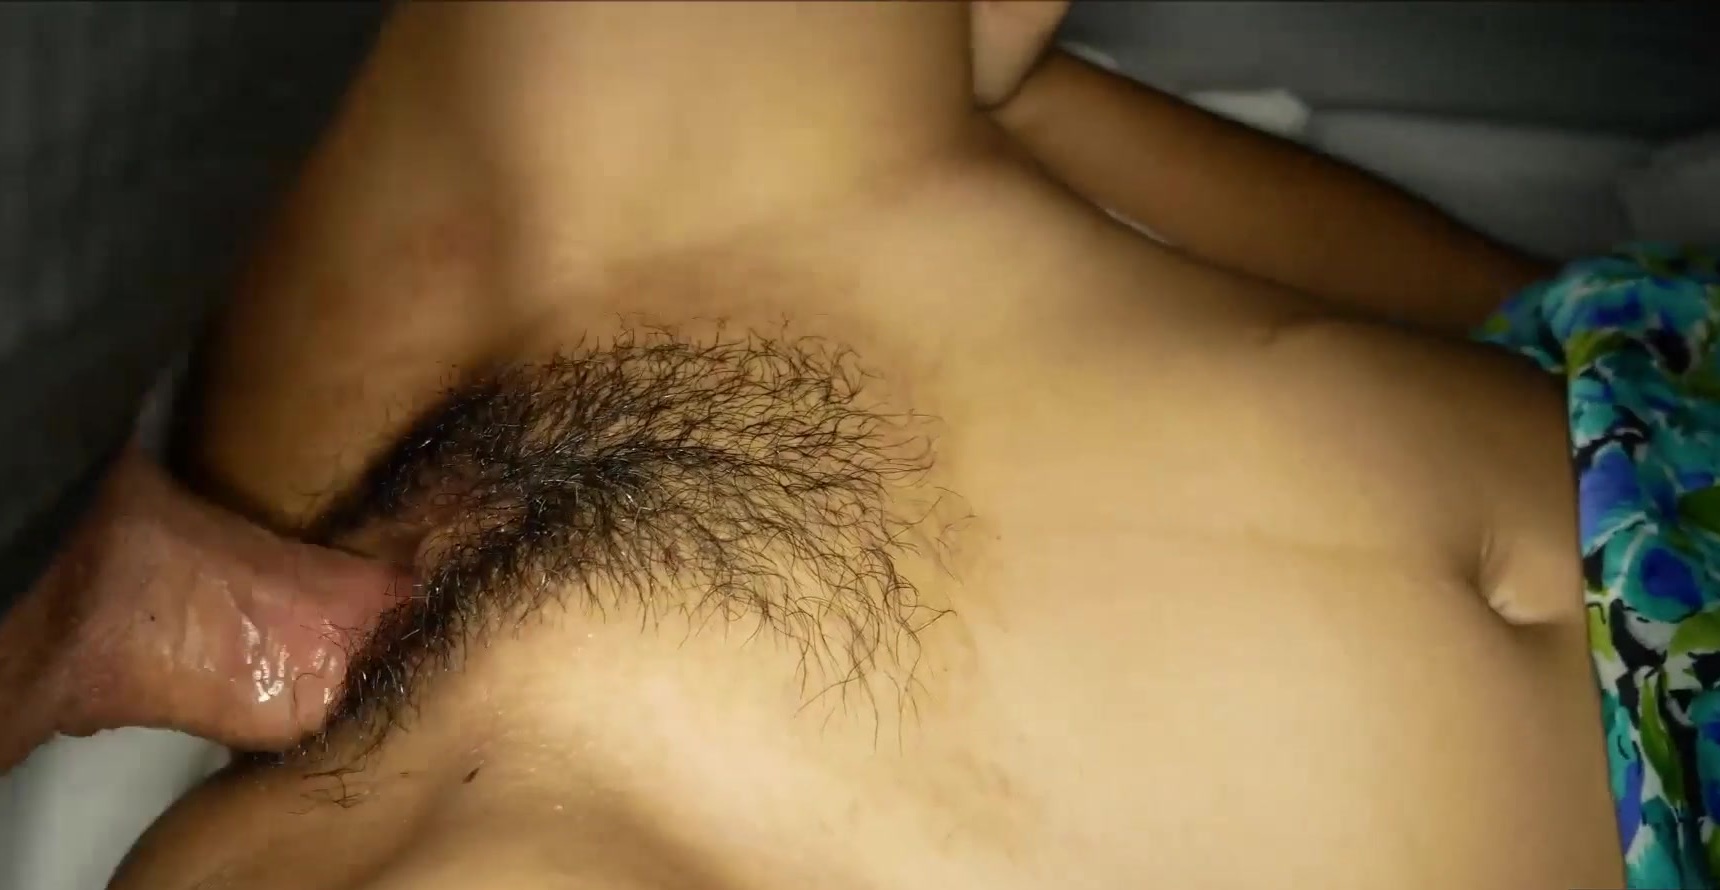 Petite Hairy Porn - Its.PORN - Petite hairy pussy teen got fucked hard after she swallowed big  hard cock